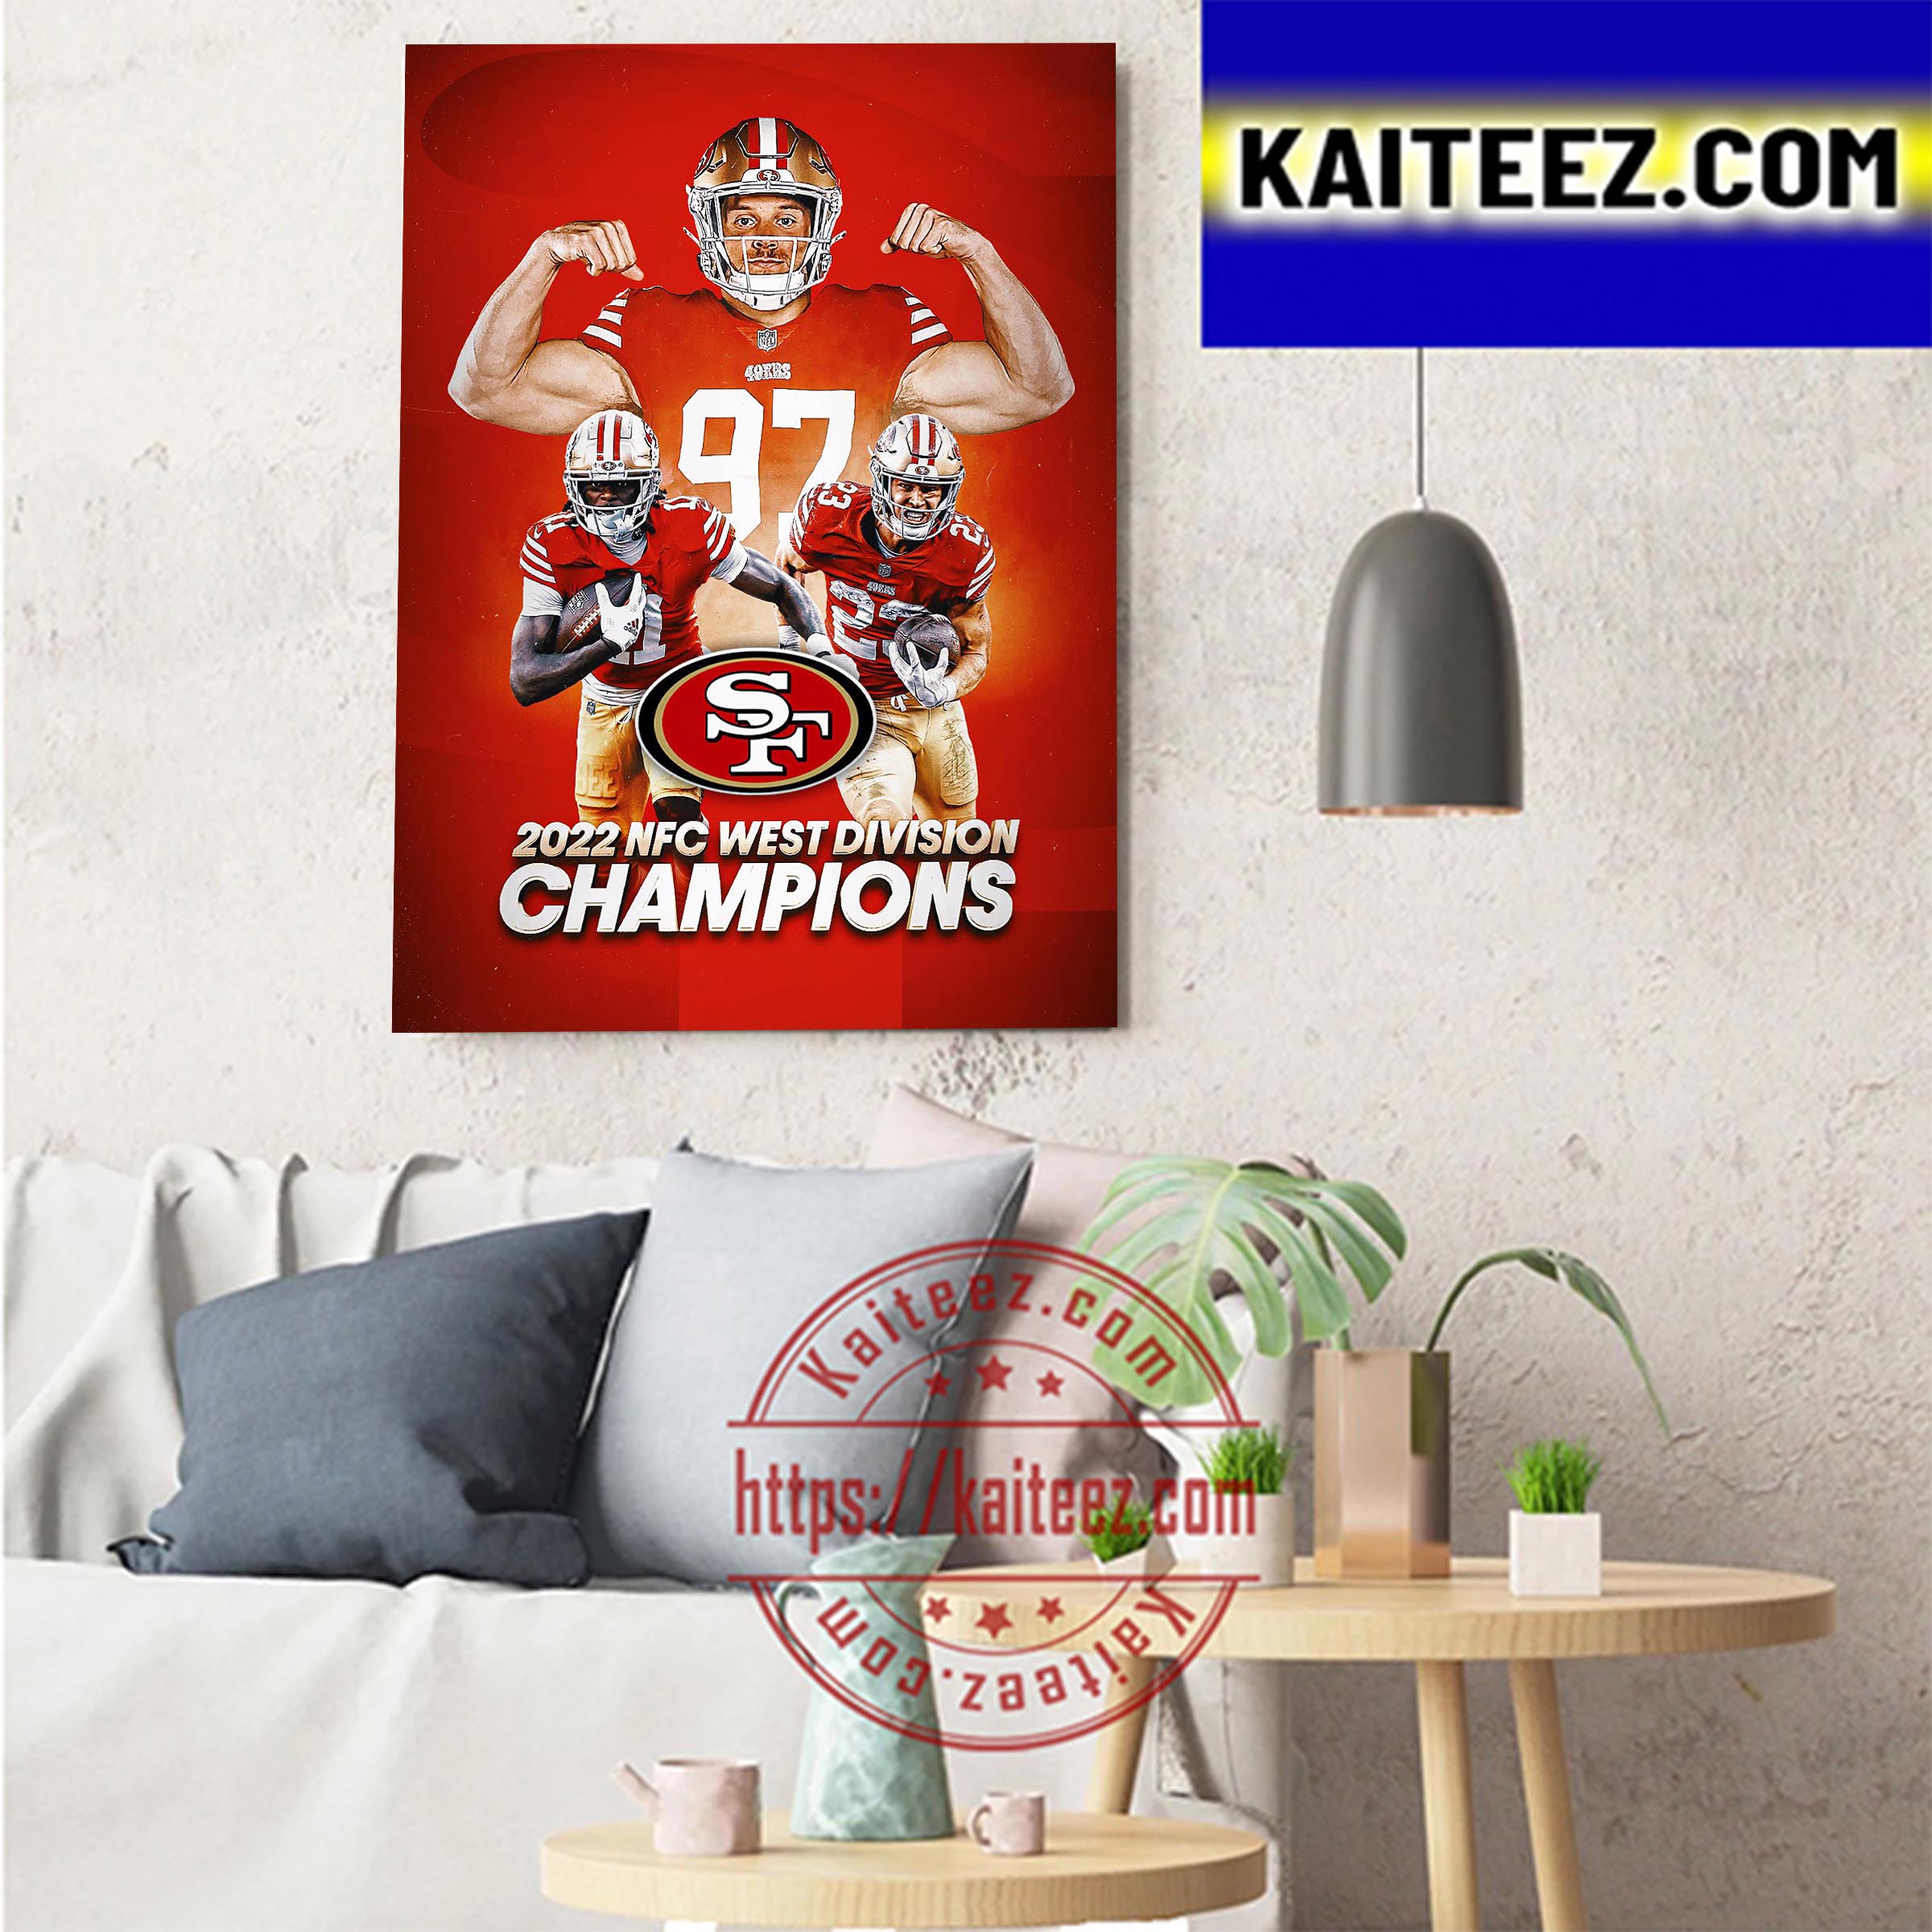 San Francisco 49ers Are 2022 NFC West Division Champions, 52% OFF